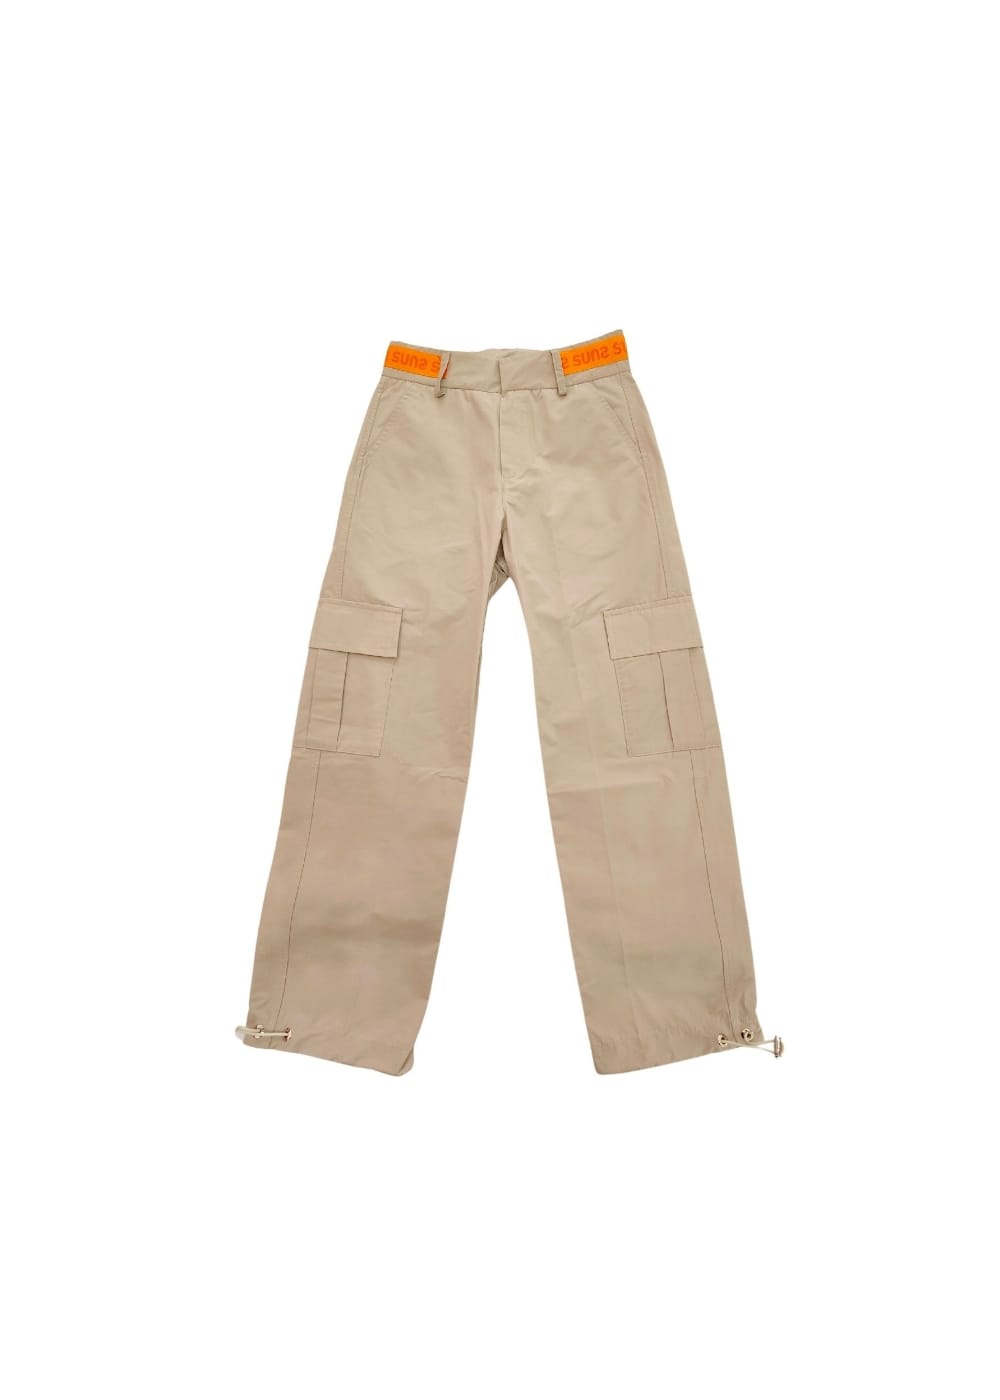 Featured image for “Suns Pantalone Cargo”